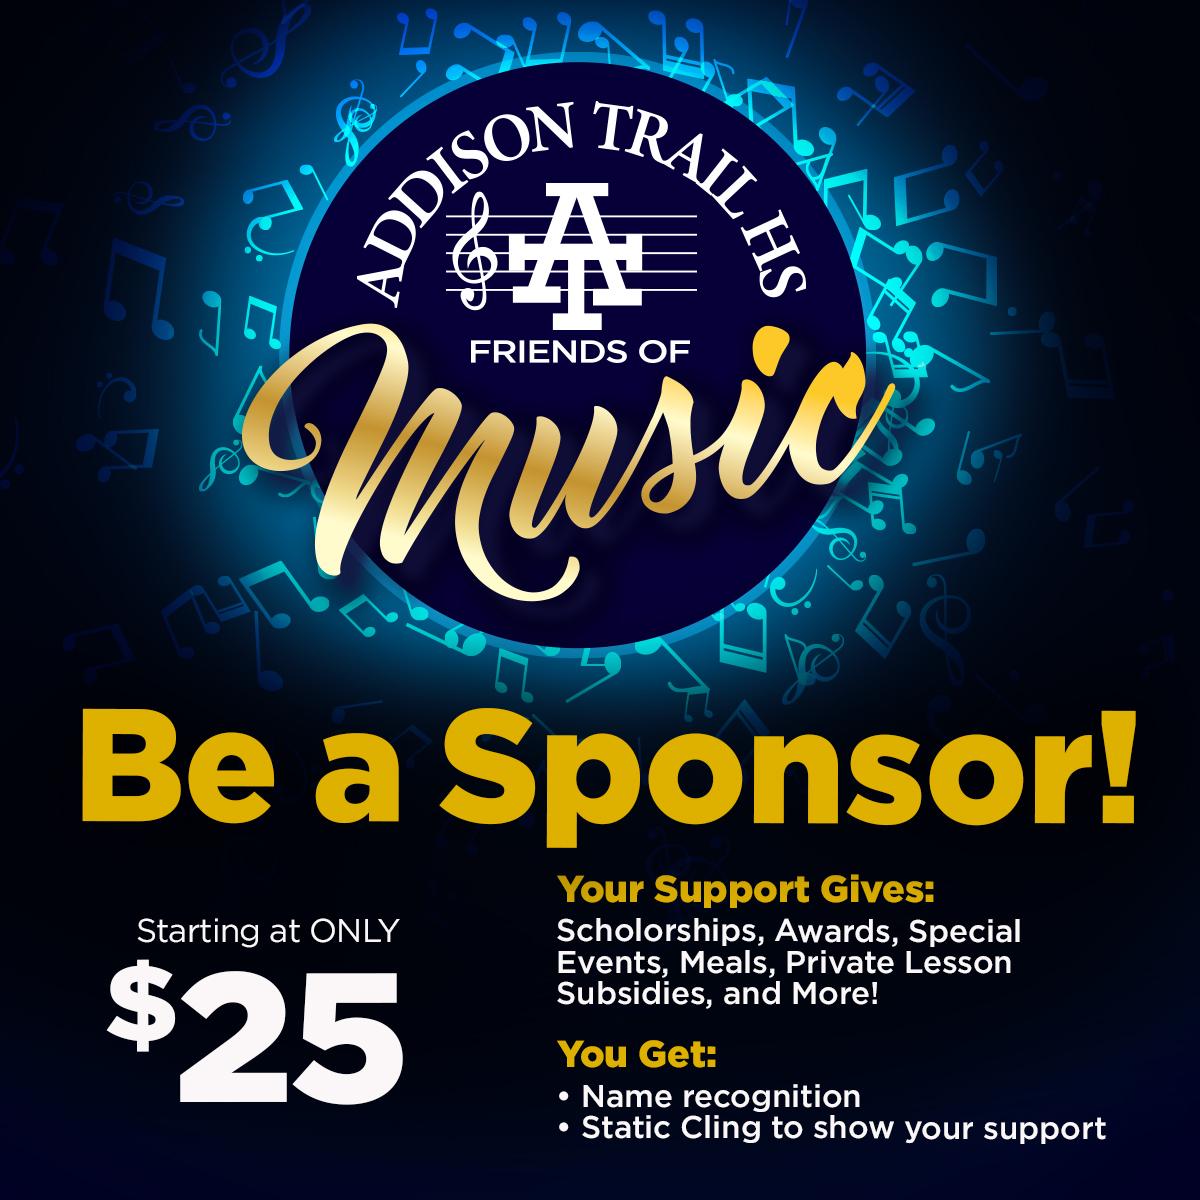 Support the Addison Trail Music Booster Club this holiday season